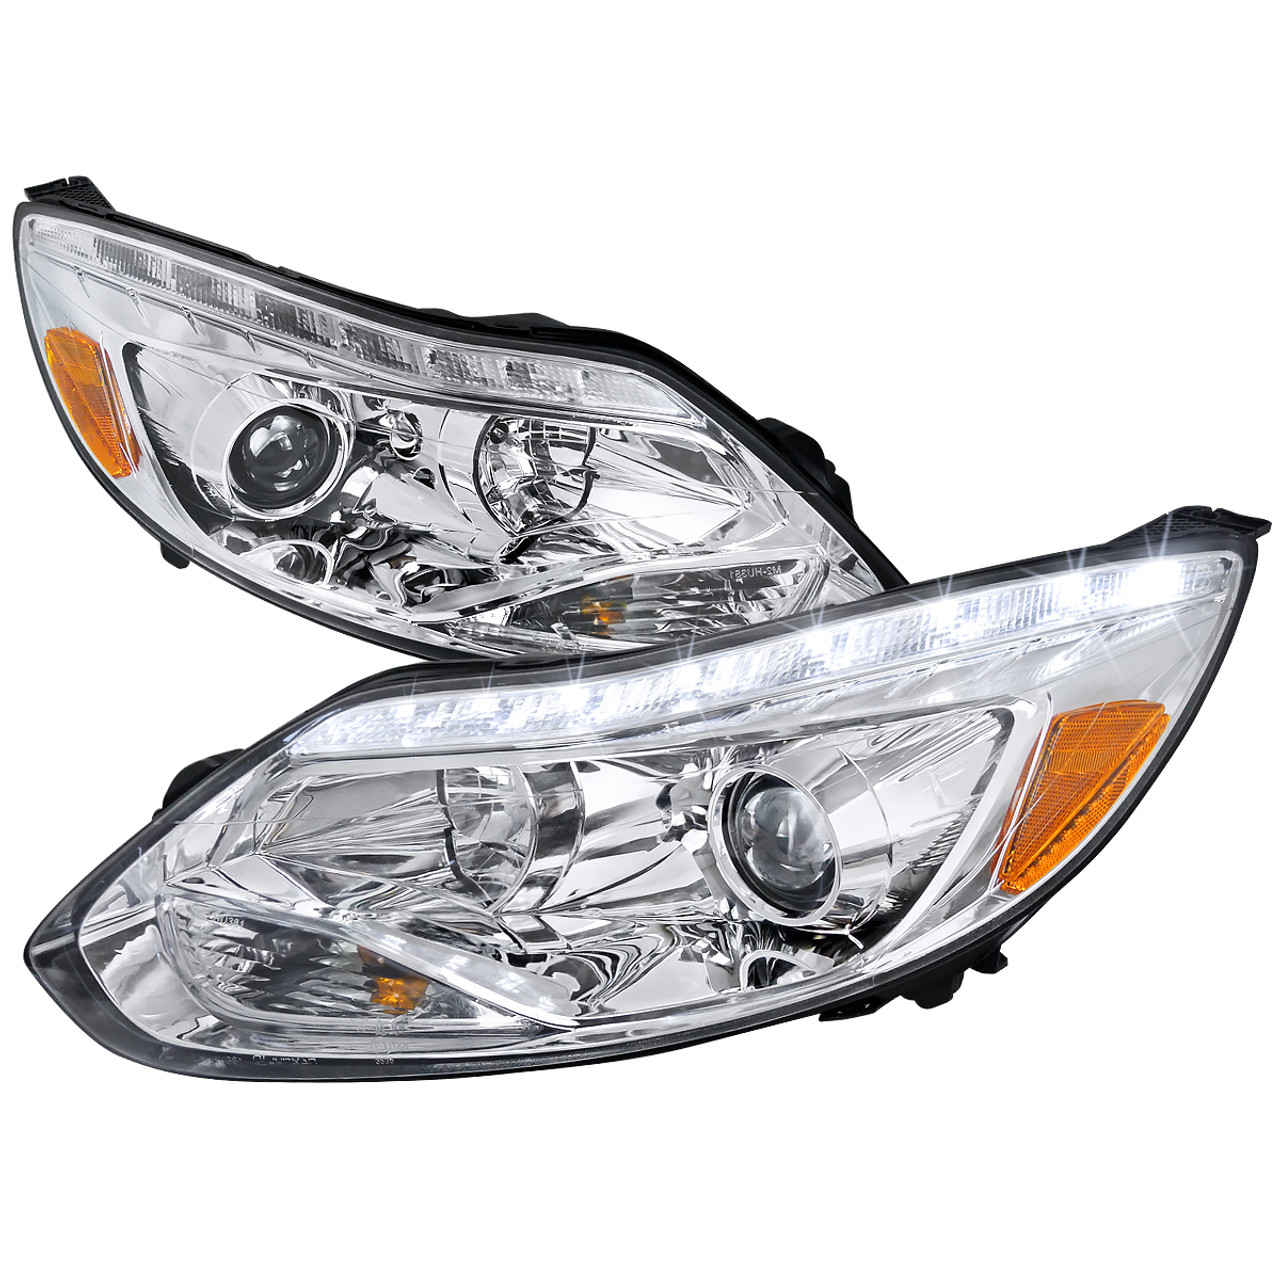 2012-2014 Ford Focus Projector Headlights w/ LED Light Strip & LED